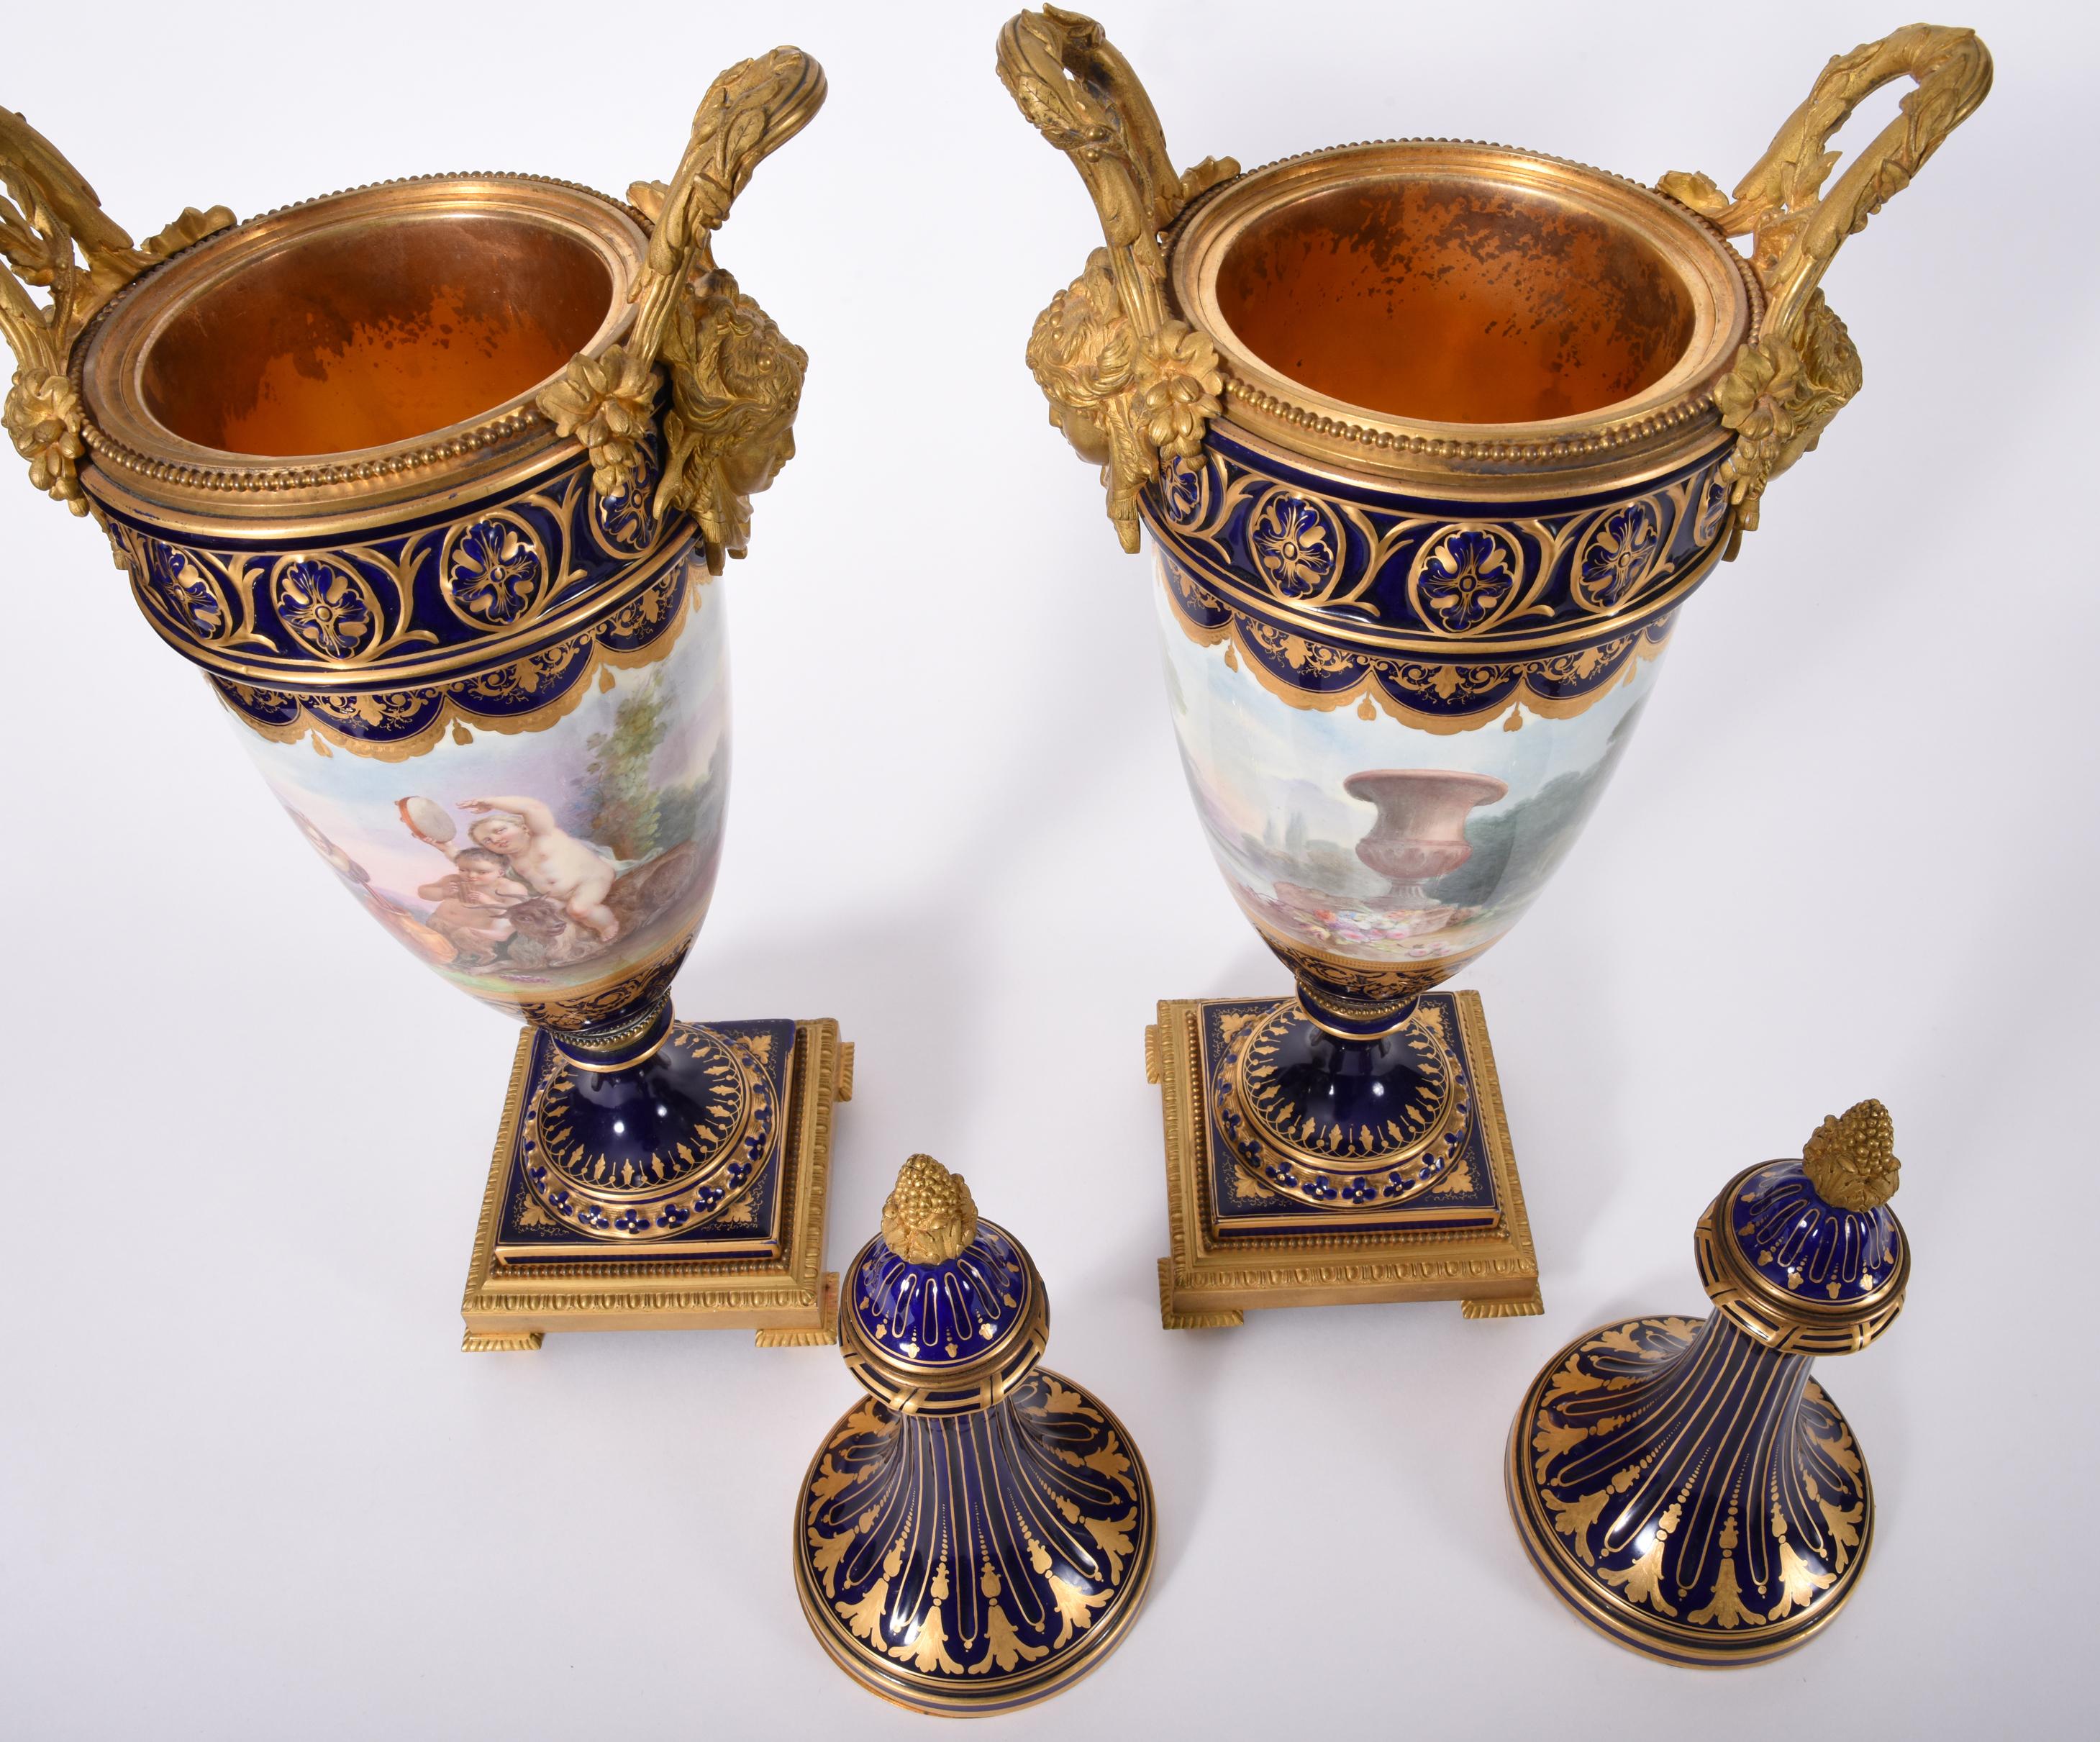 Early 19th Century Matching Pair of Bronze Mounted Porcelain Urns (Glasiert)